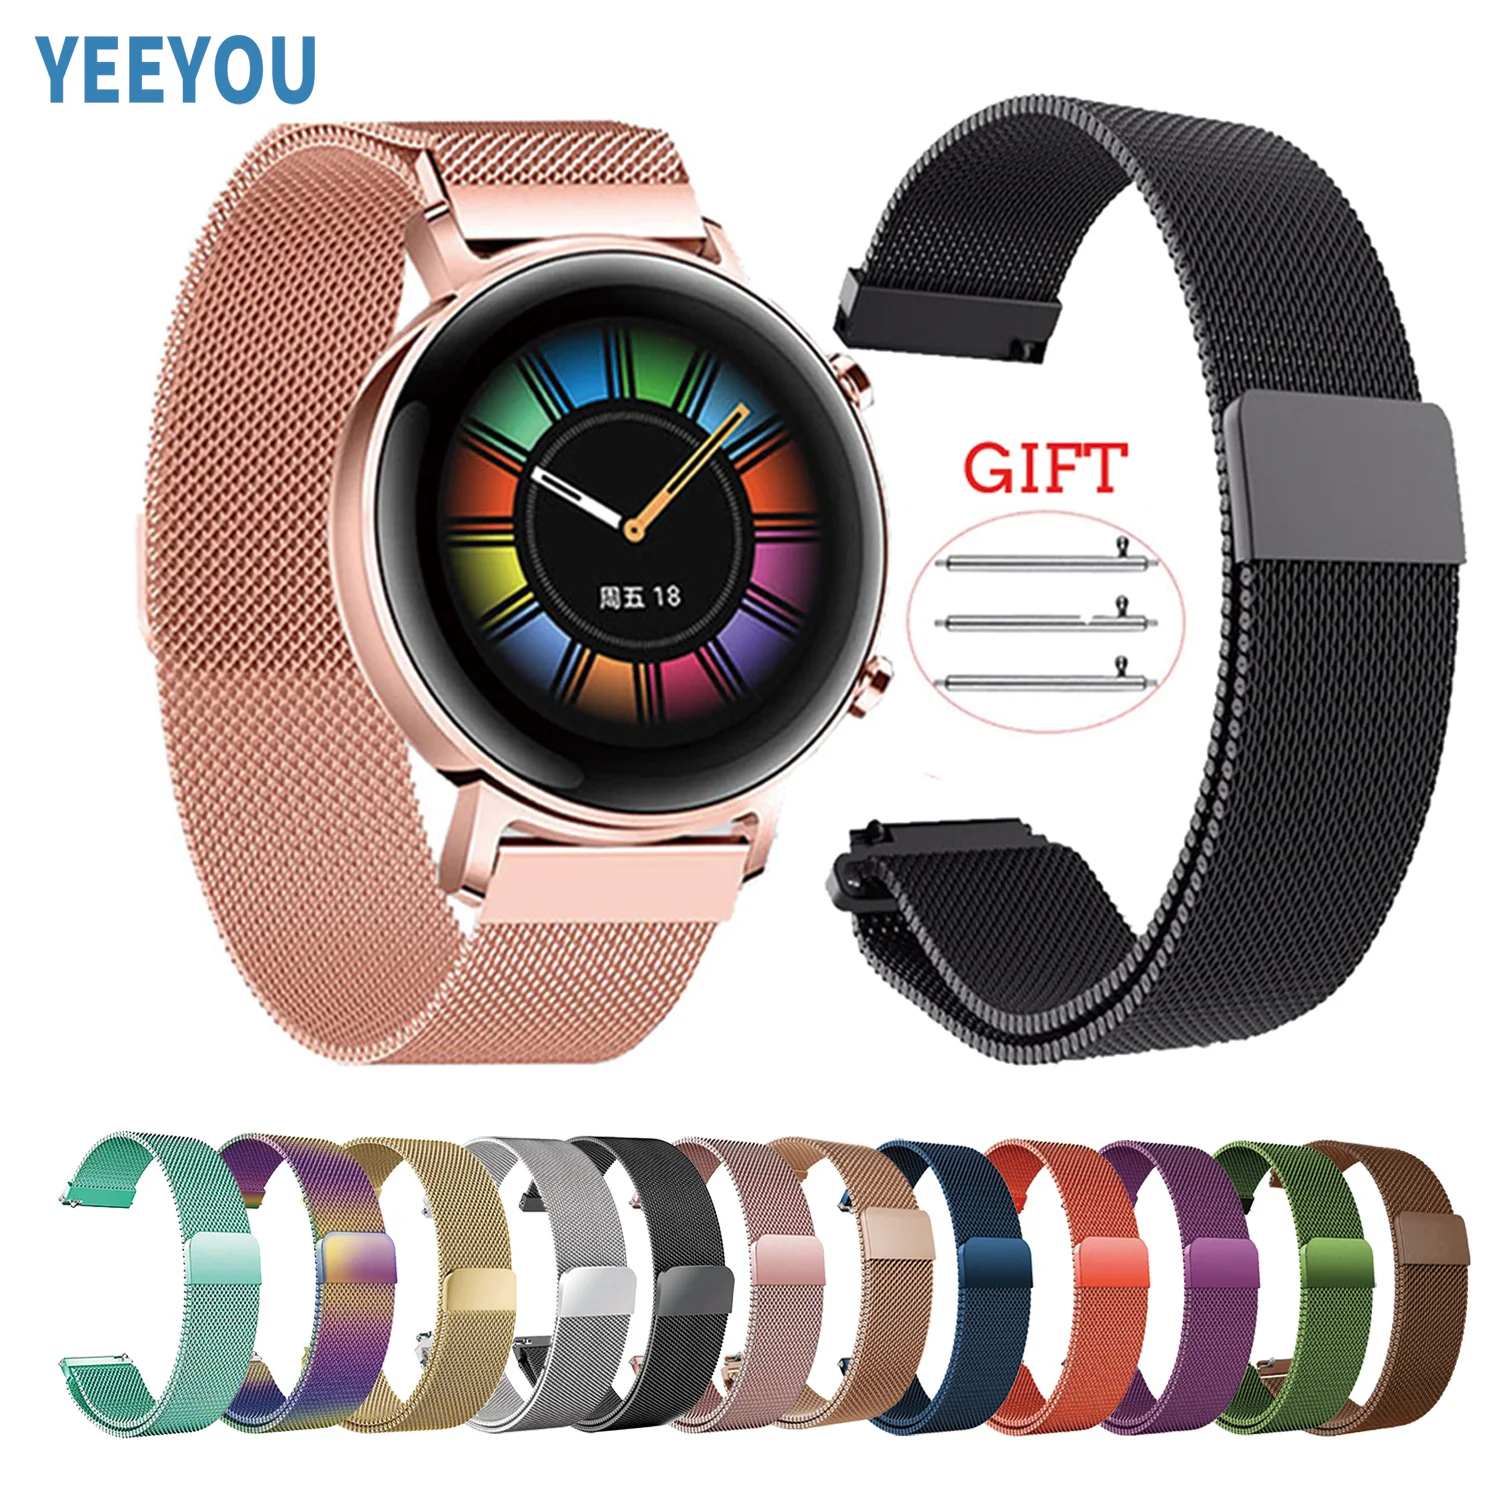 

Stainless steel metal strap Magnetic Mesh Milanese Loop 20mm 22mm for Huawei Garmin Samsung Galaxy active 2 smart watch Band, Multi-color optional or customized